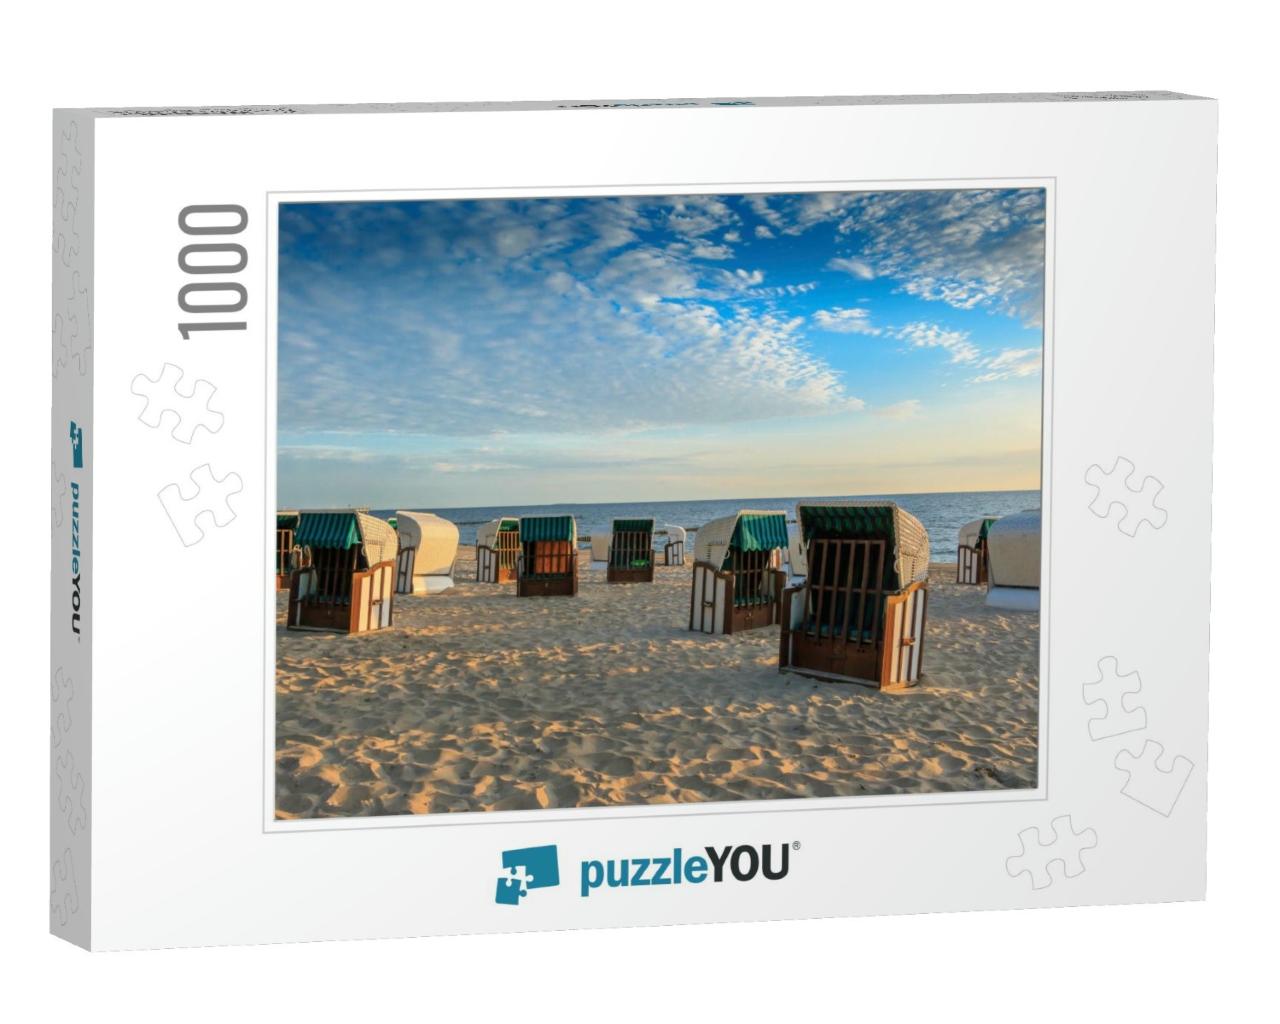 Beach Chairs At the Beach of Usedom Island, Germany... Jigsaw Puzzle with 1000 pieces